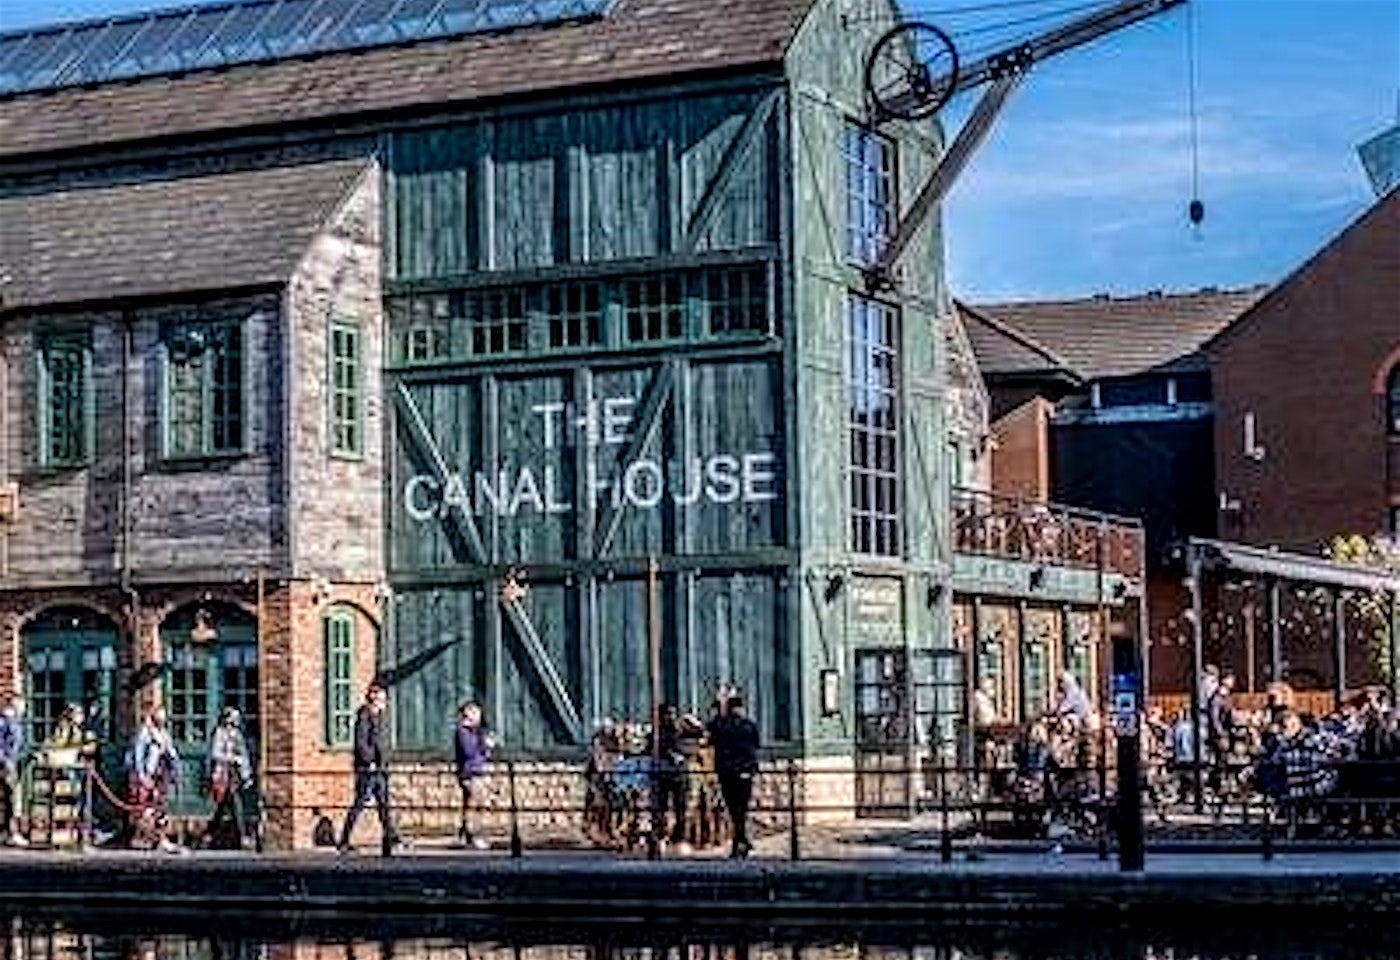 The Canal House birmingham rooftop 2